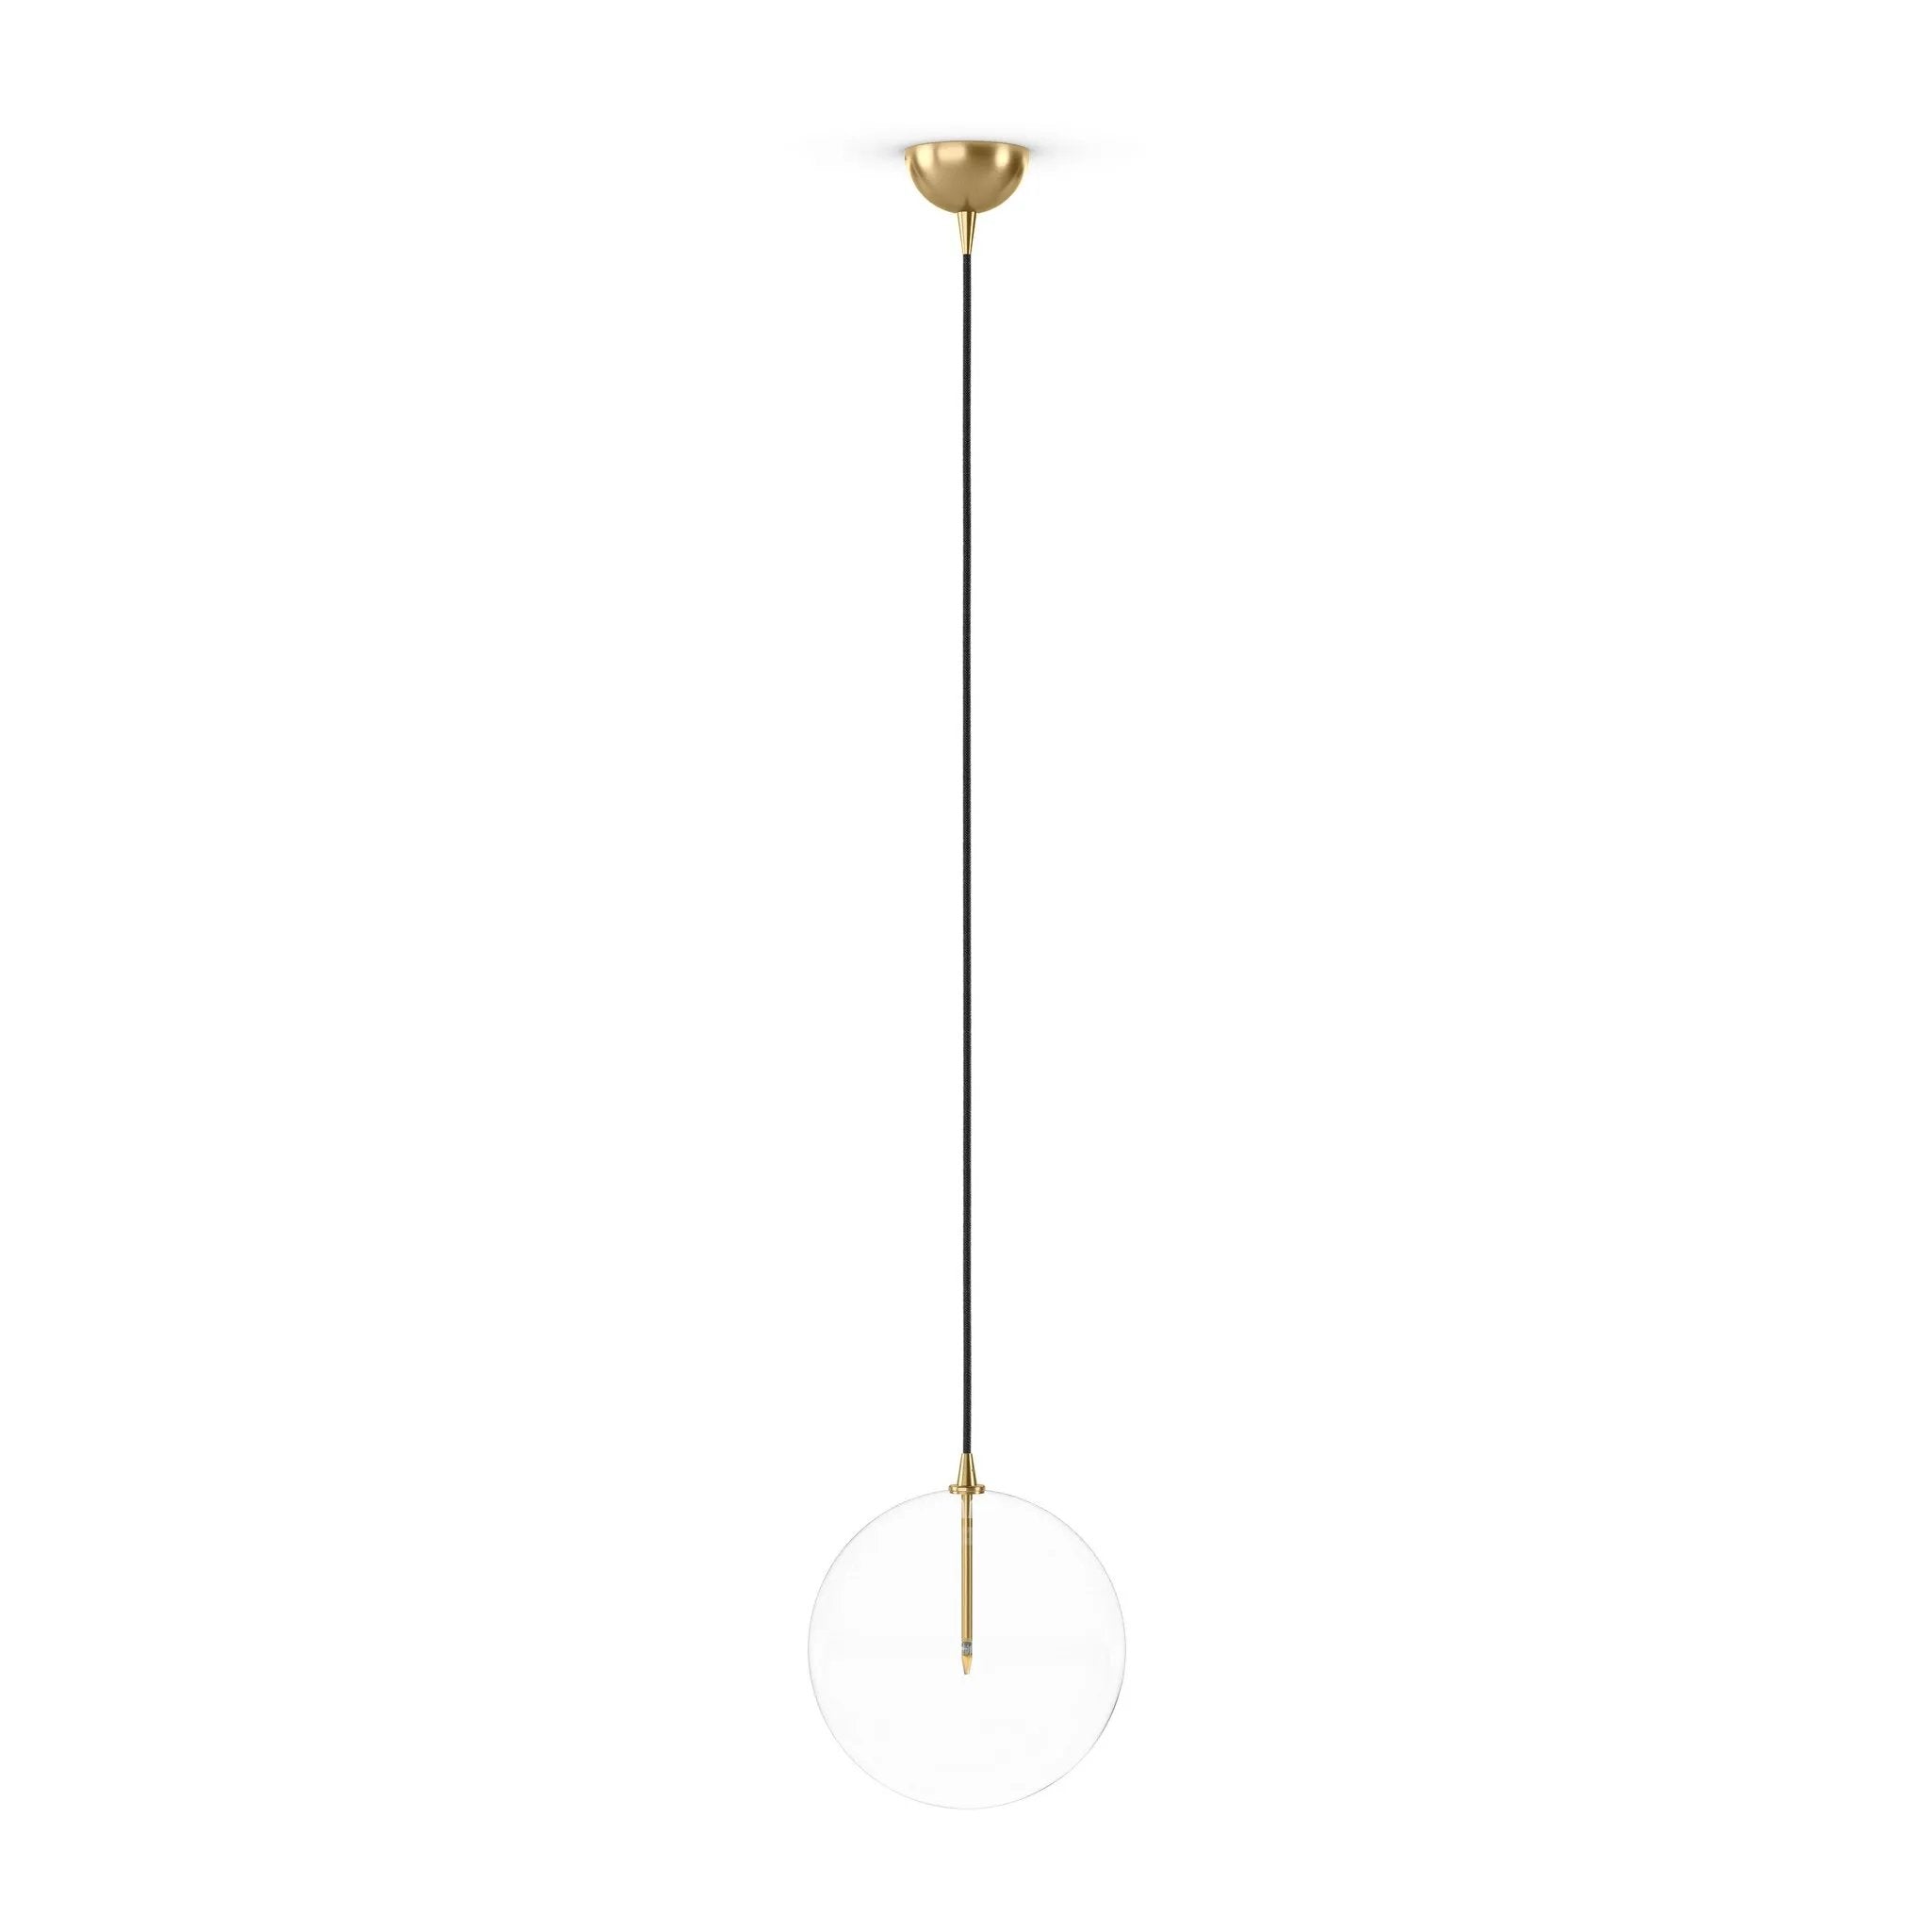 A single glass sphere dangles for a stunning effect. Each globe is individually blown, shaped and sculpted by hand through a one-hour process. Brass and glass are 98% recyclable. Designed and sustainably crafted in Poland by Schwung.Overall Dimensions11.75"w x 11.75"d x 19.25"hFull Details &amp; SpecificationsTear Shee Amethyst Home provides interior design, new home construction design consulting, vintage area rugs, and lighting in the Kansas City metro area.